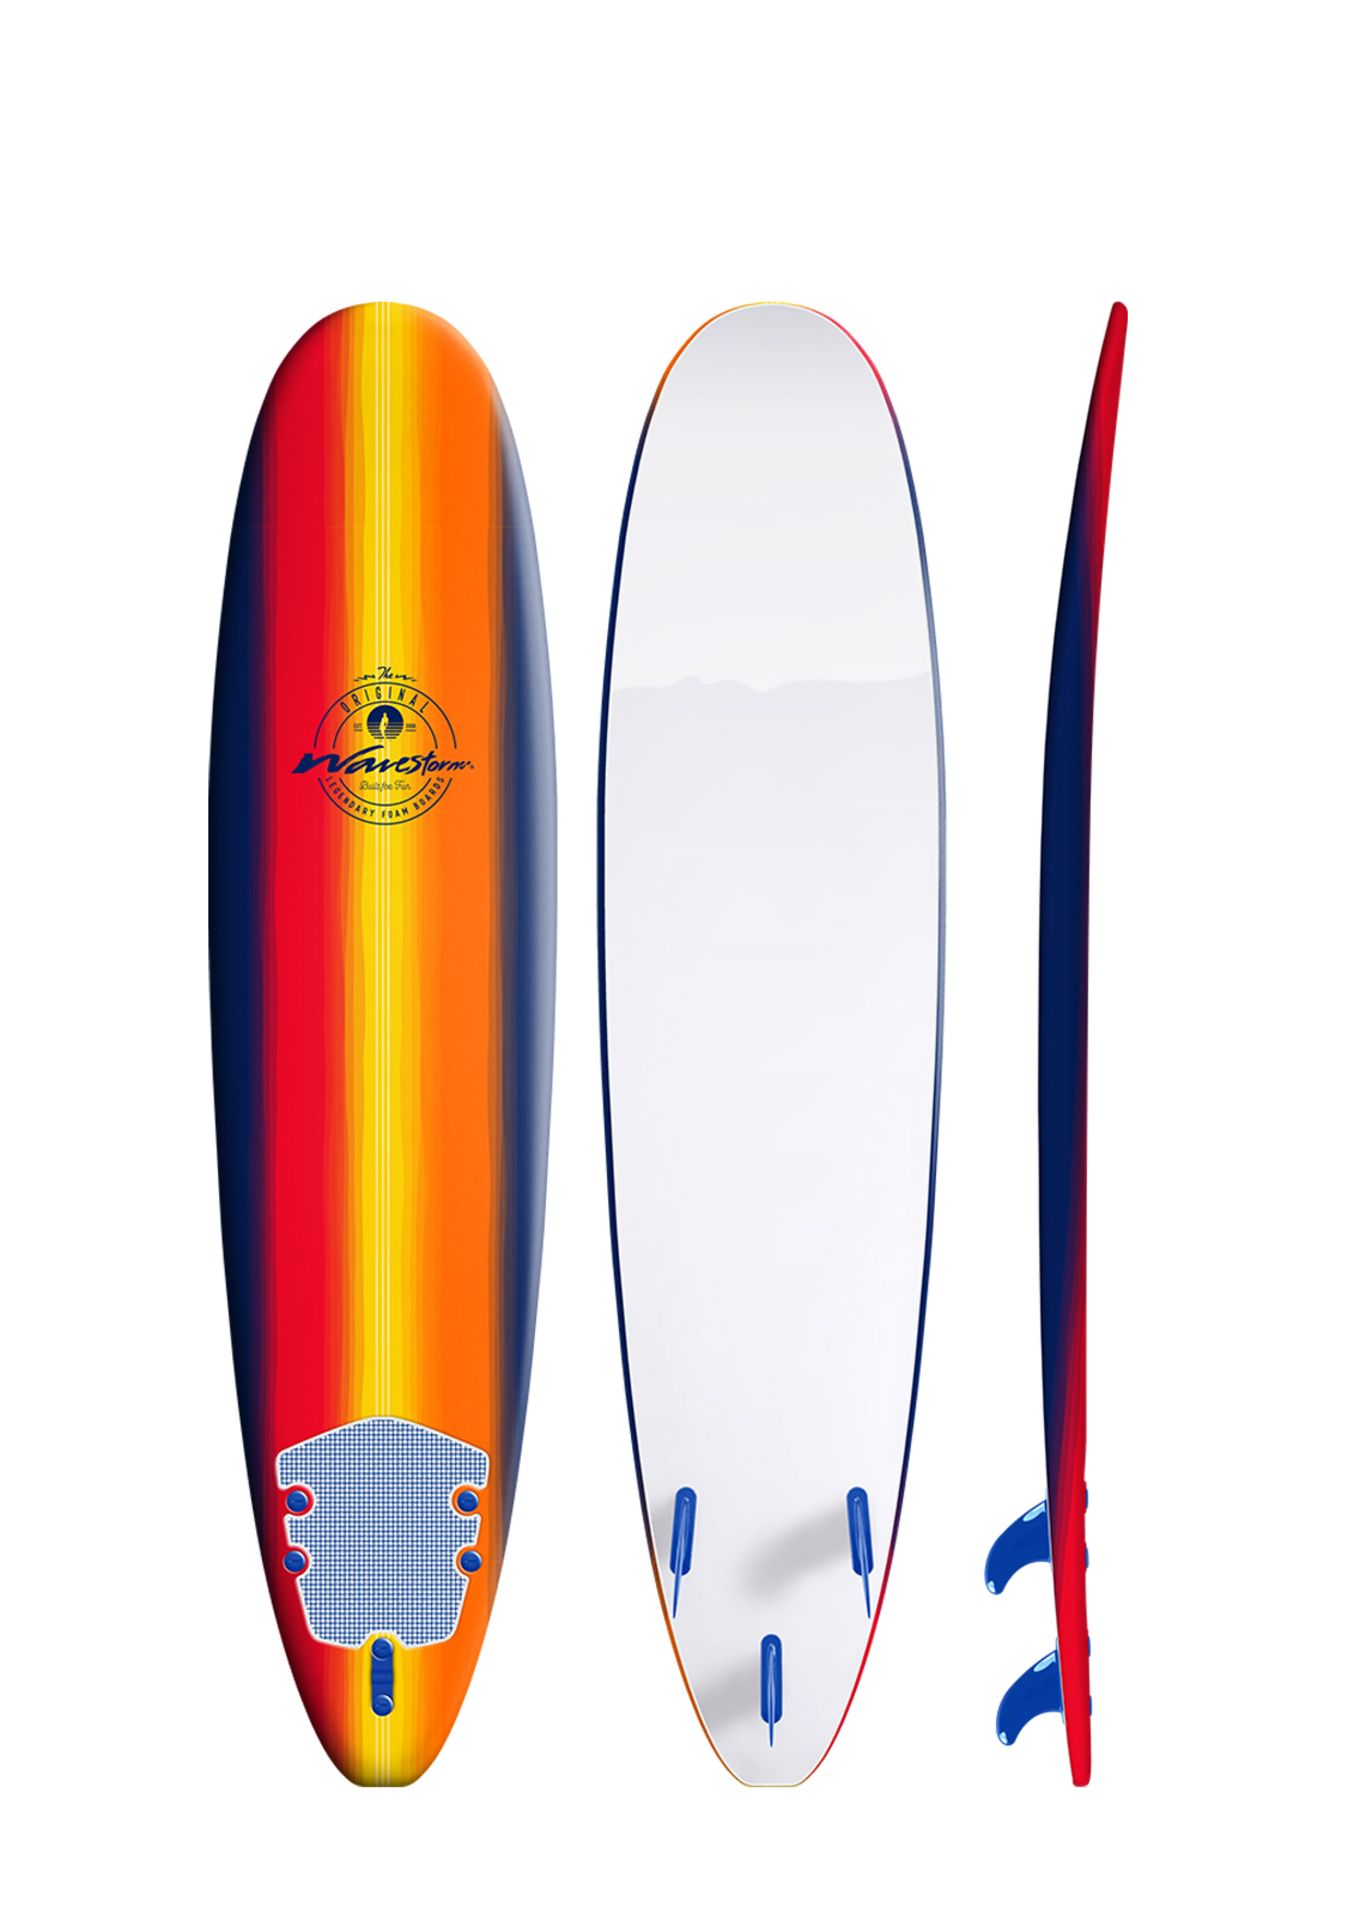 1 WAVESTORM 8FT/ 244CM CLASSIC SURFBOARD RRP Â£199 (HAS MARKS AND FEW CHIPS, GENERIC IMAGE GUIDE)